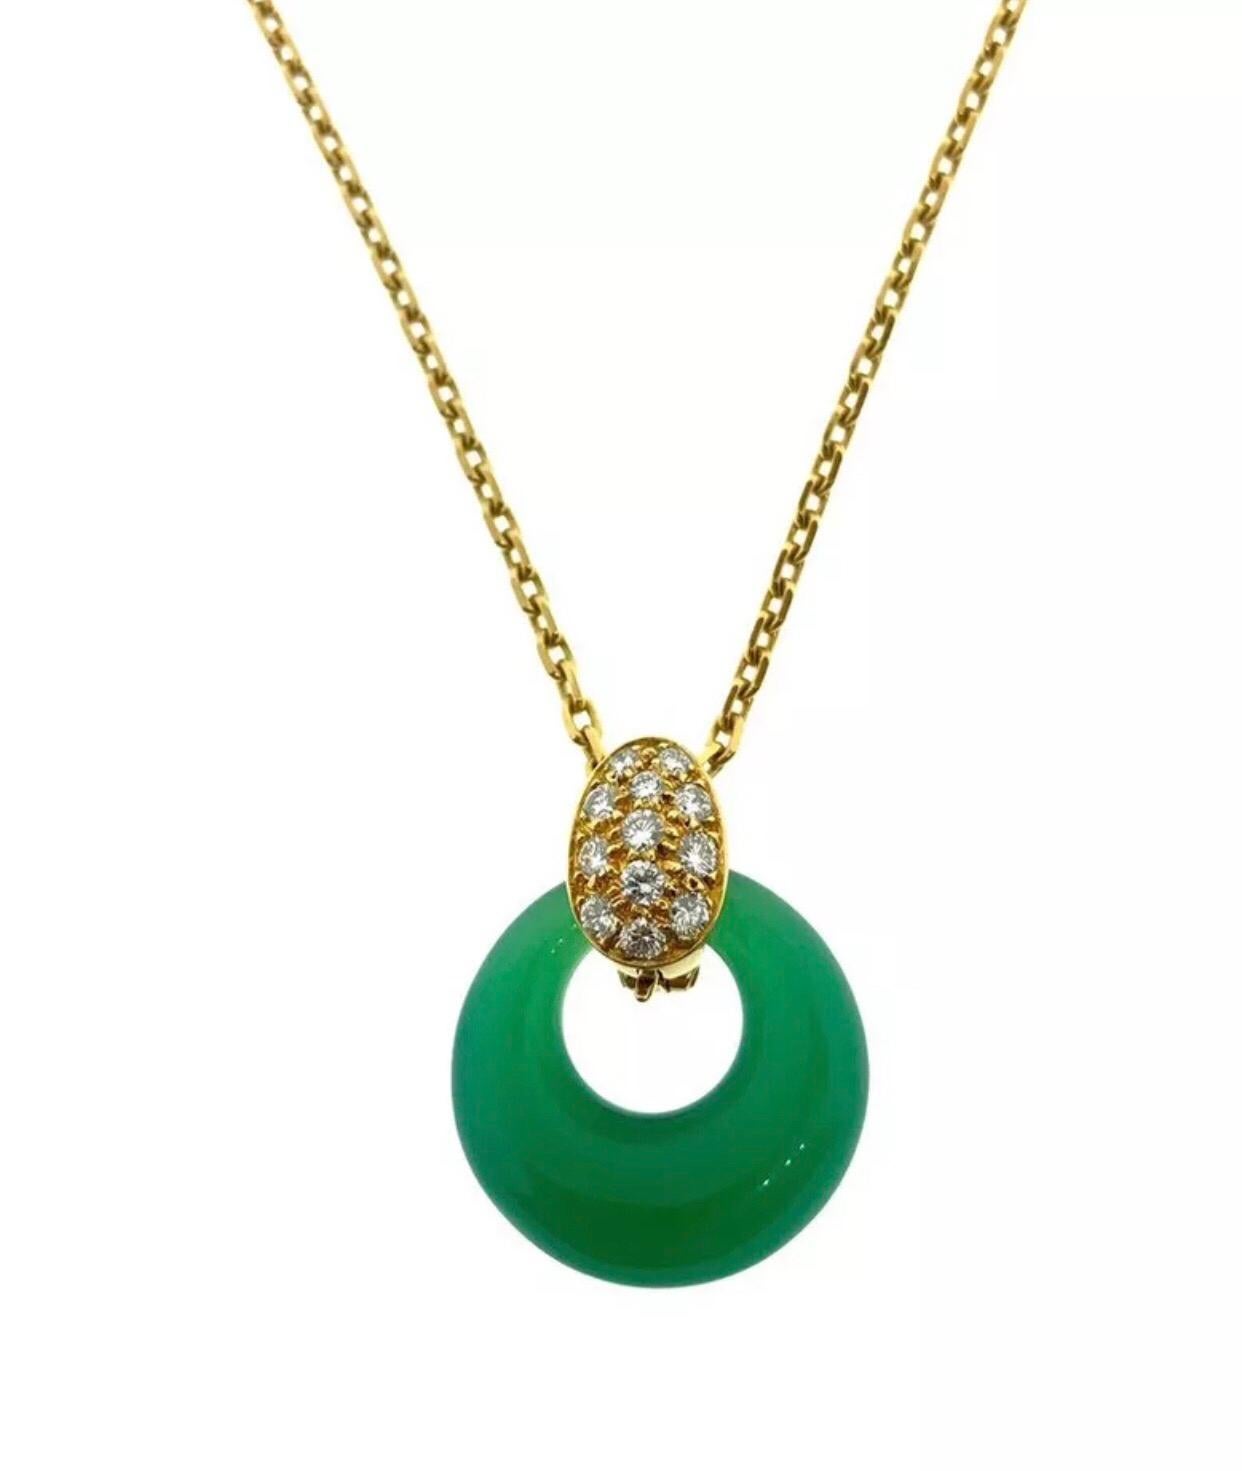 Van Cleef & Arpels Diamond Interchangeable Onyx Pearl Chrysoprase Necklace

This a beautiful and really fun Van Cleef & Arpels necklace. It comes with three interchangeable pendants which are each made up of semi-precious materials. The clip that